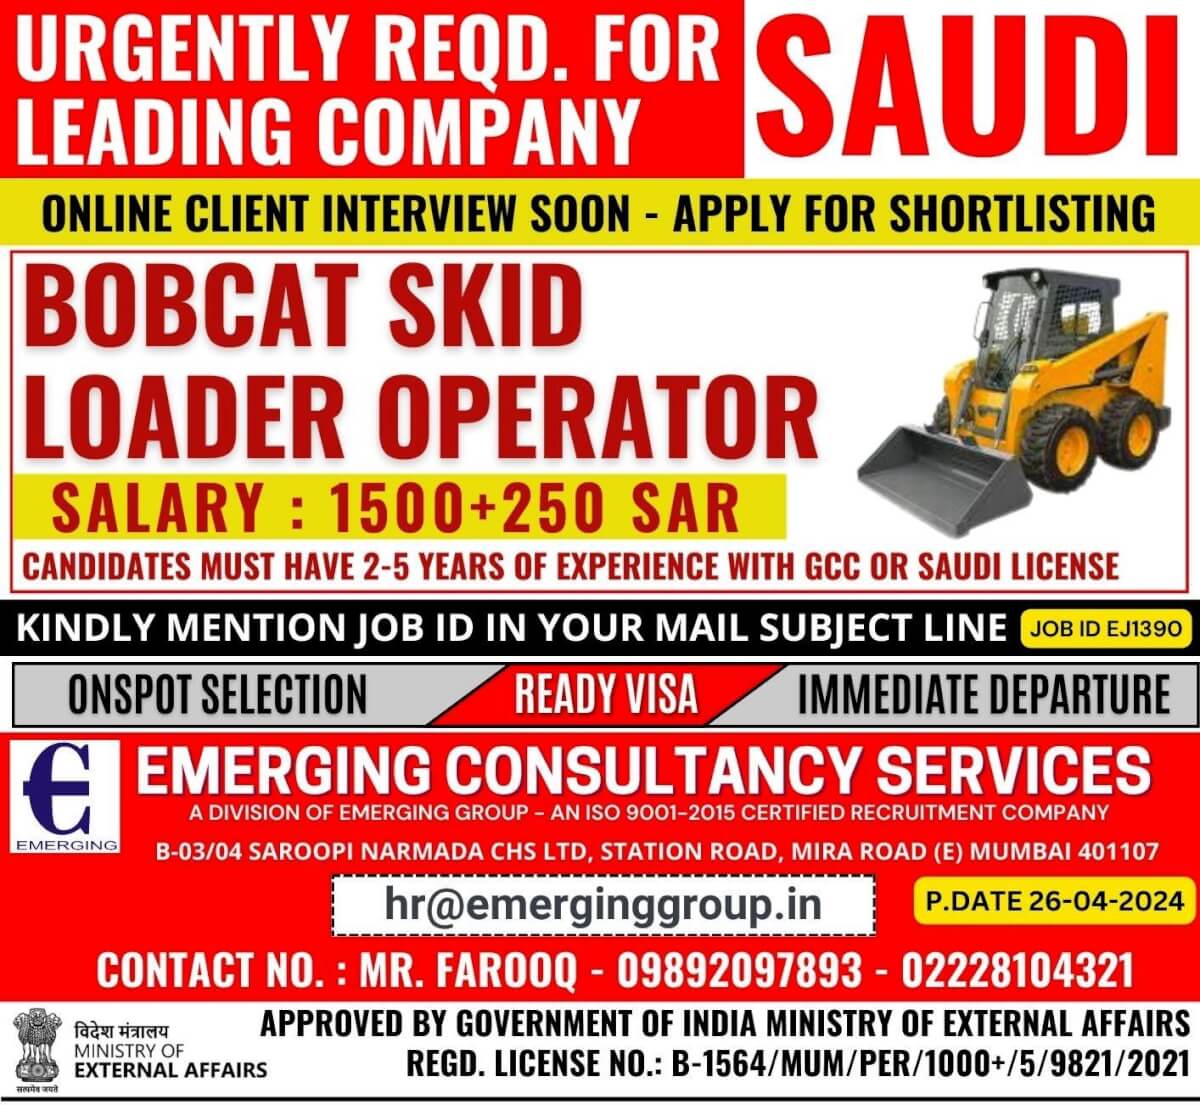 URGENTLY REQUIRED FOR LEADING COMPANY IN SAUDI ARABIA - CLIENT INTERVIEW SOON